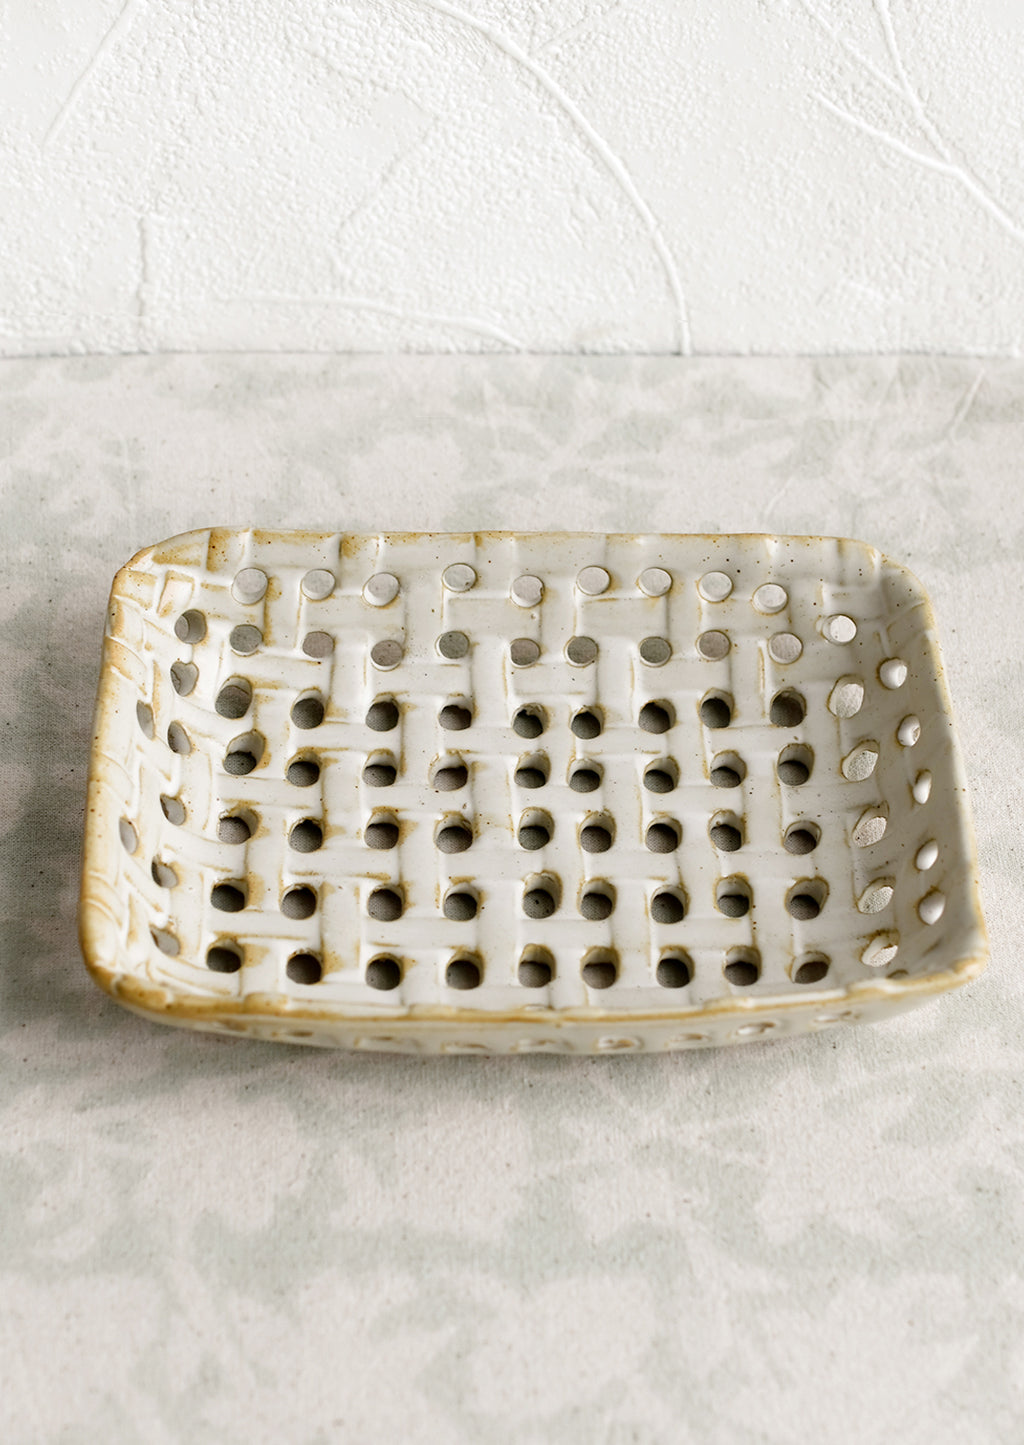 1: A rectangular shaped ceramic tray with open basketweave design.